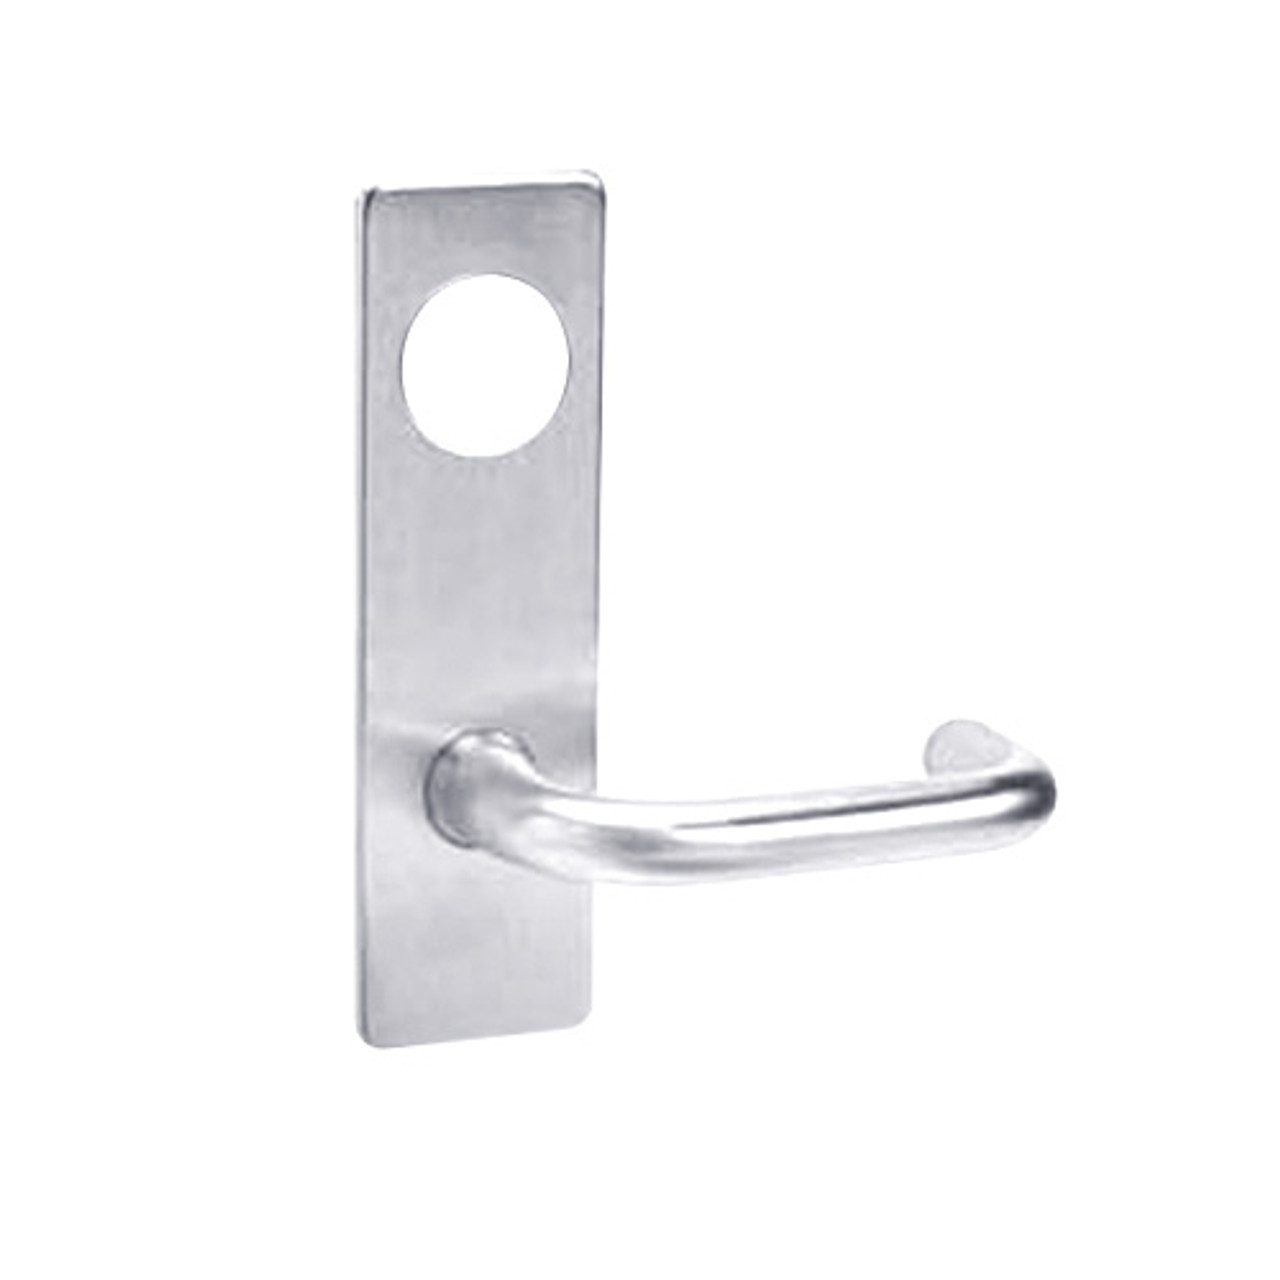 ML2051-LSM-625-M31 Corbin Russwin ML2000 Series Mortise Office Trim Pack with Lustra Lever in Bright Chrome